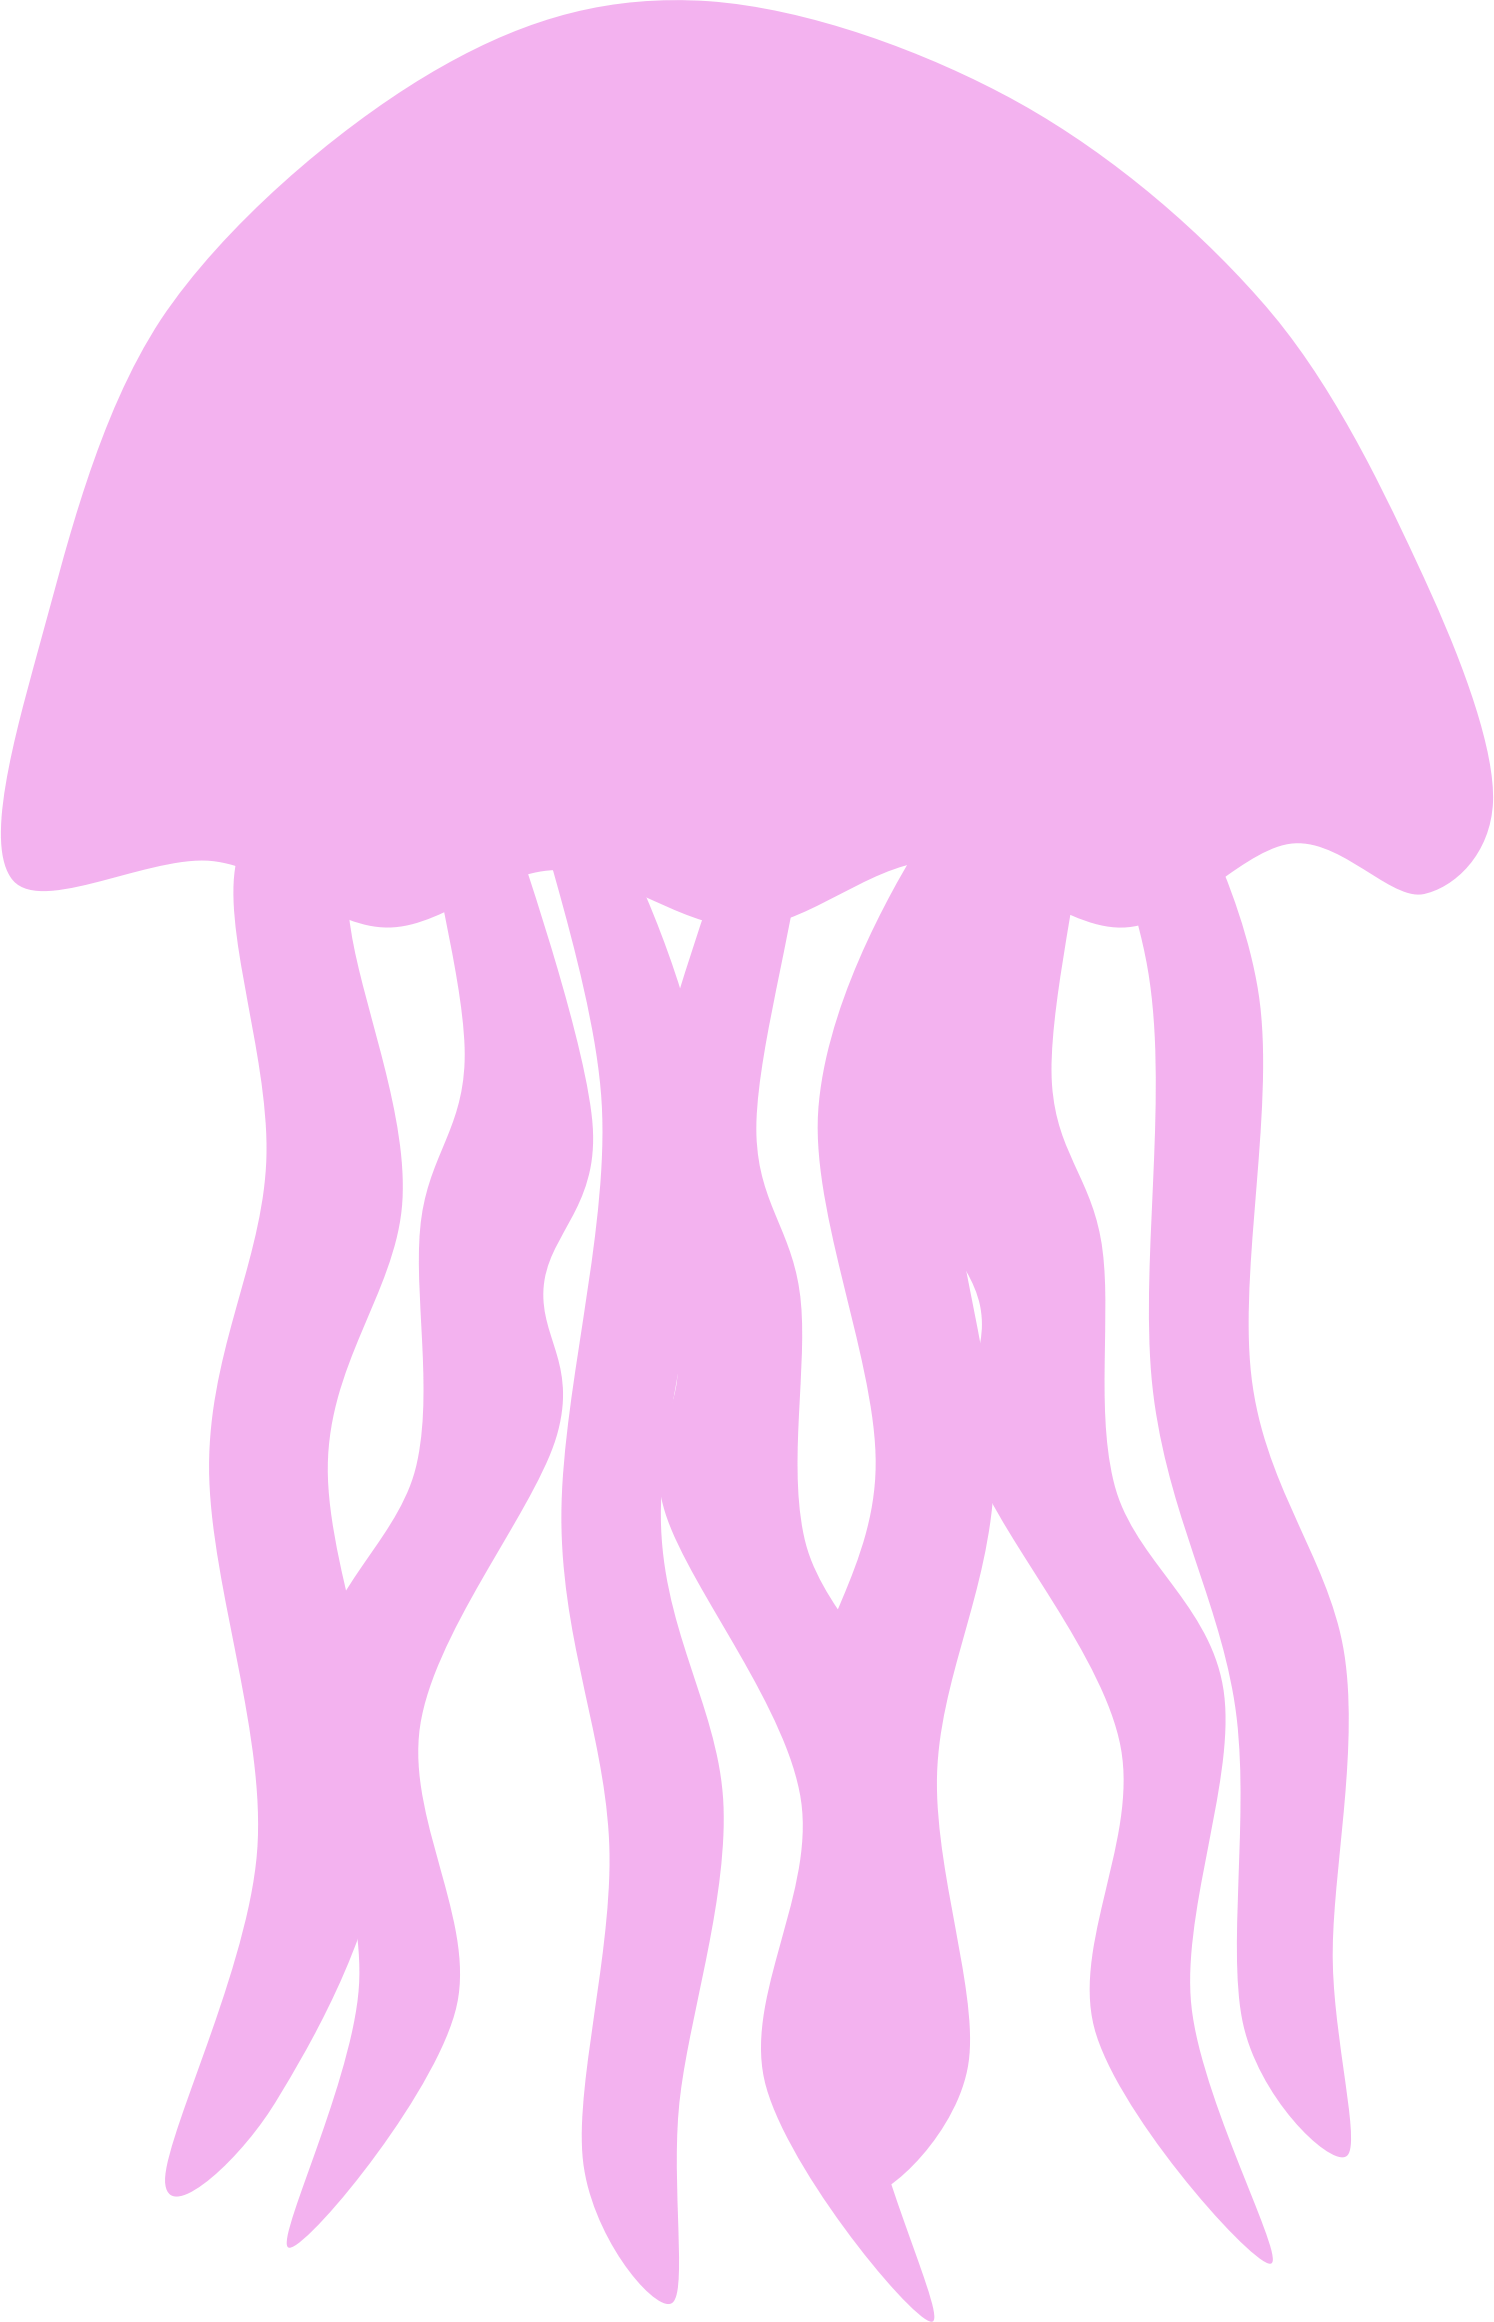 Jellyfish Silhouette by